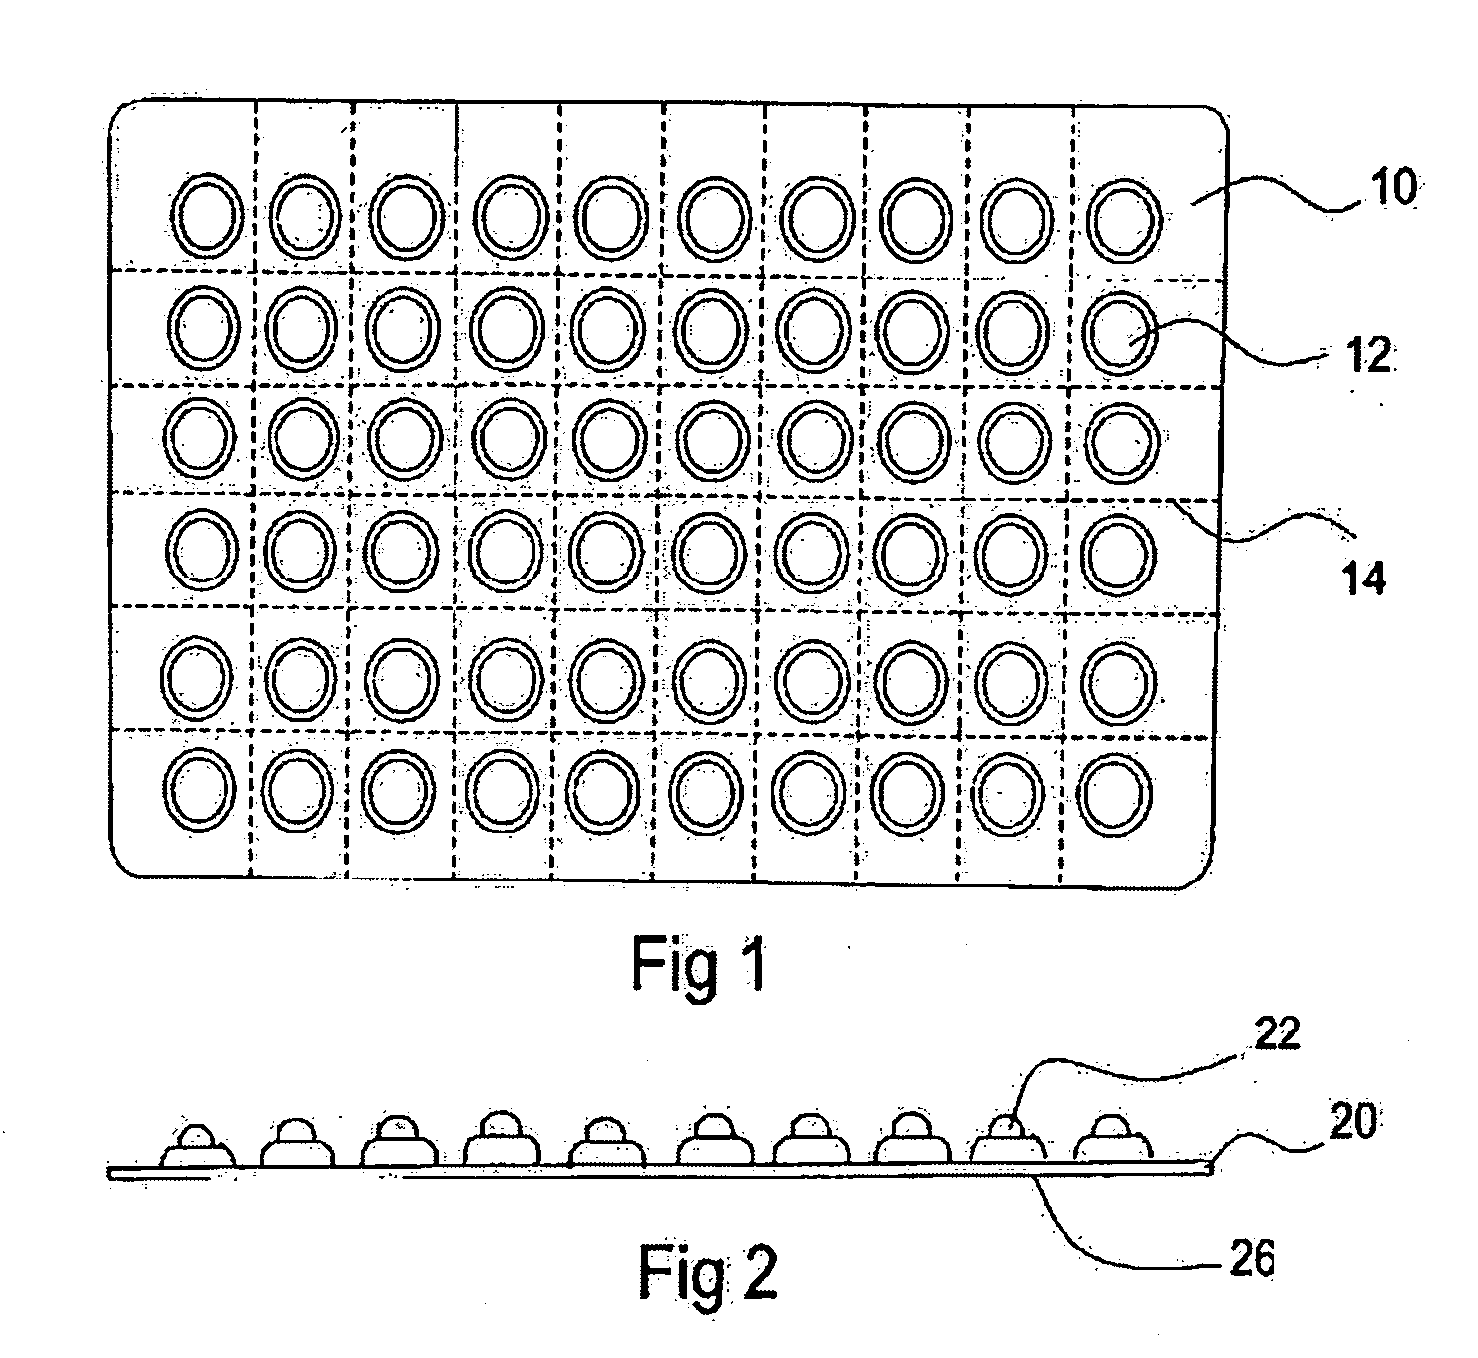 Medication record system and method